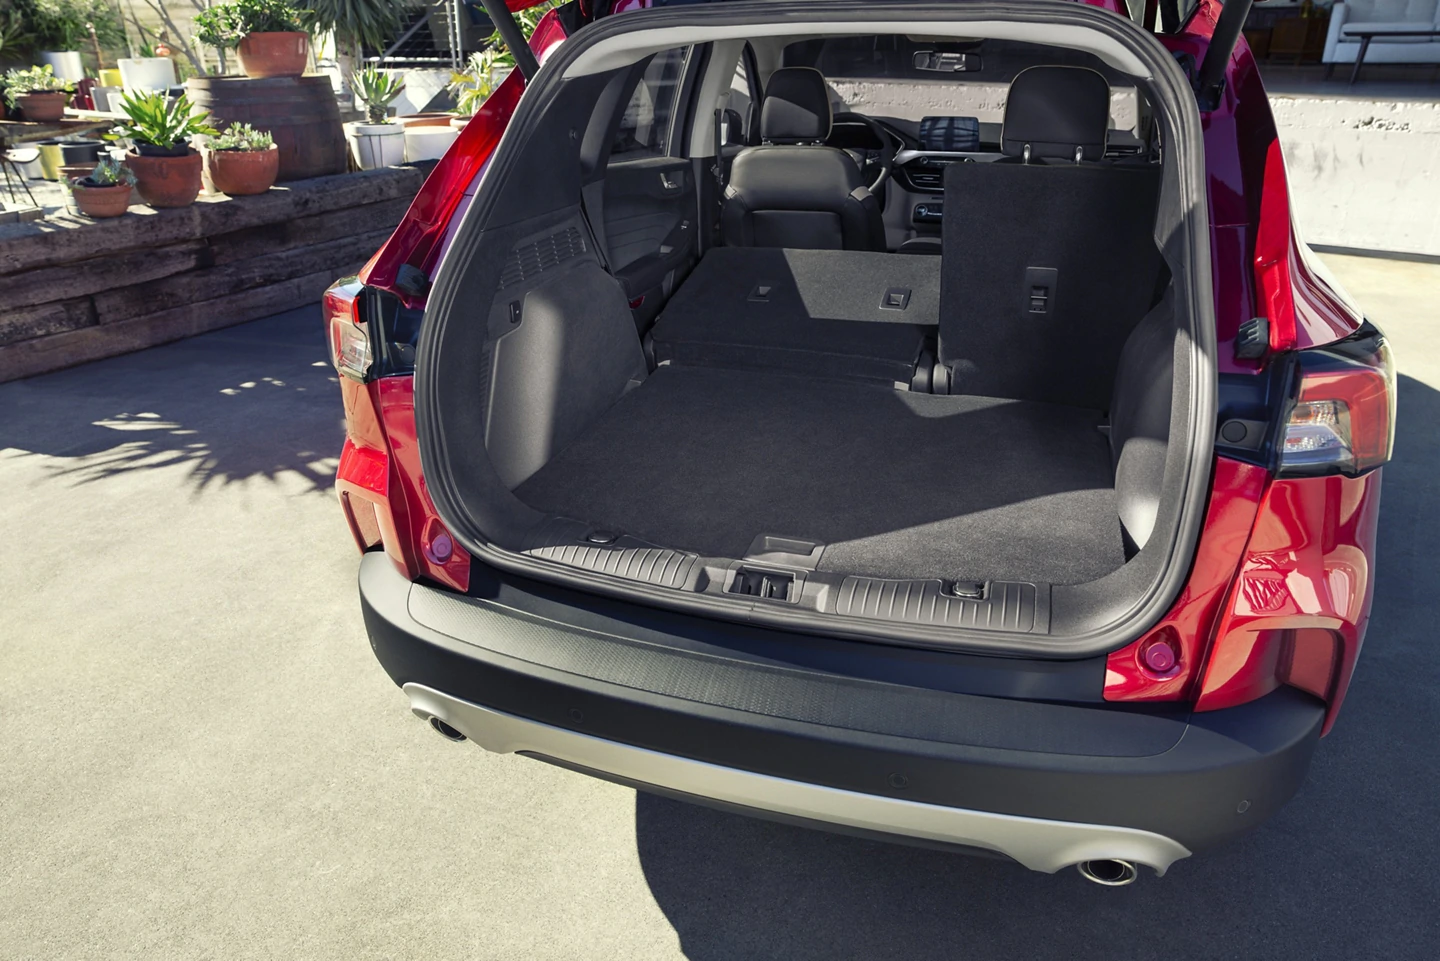 Ford Escape Trunk space